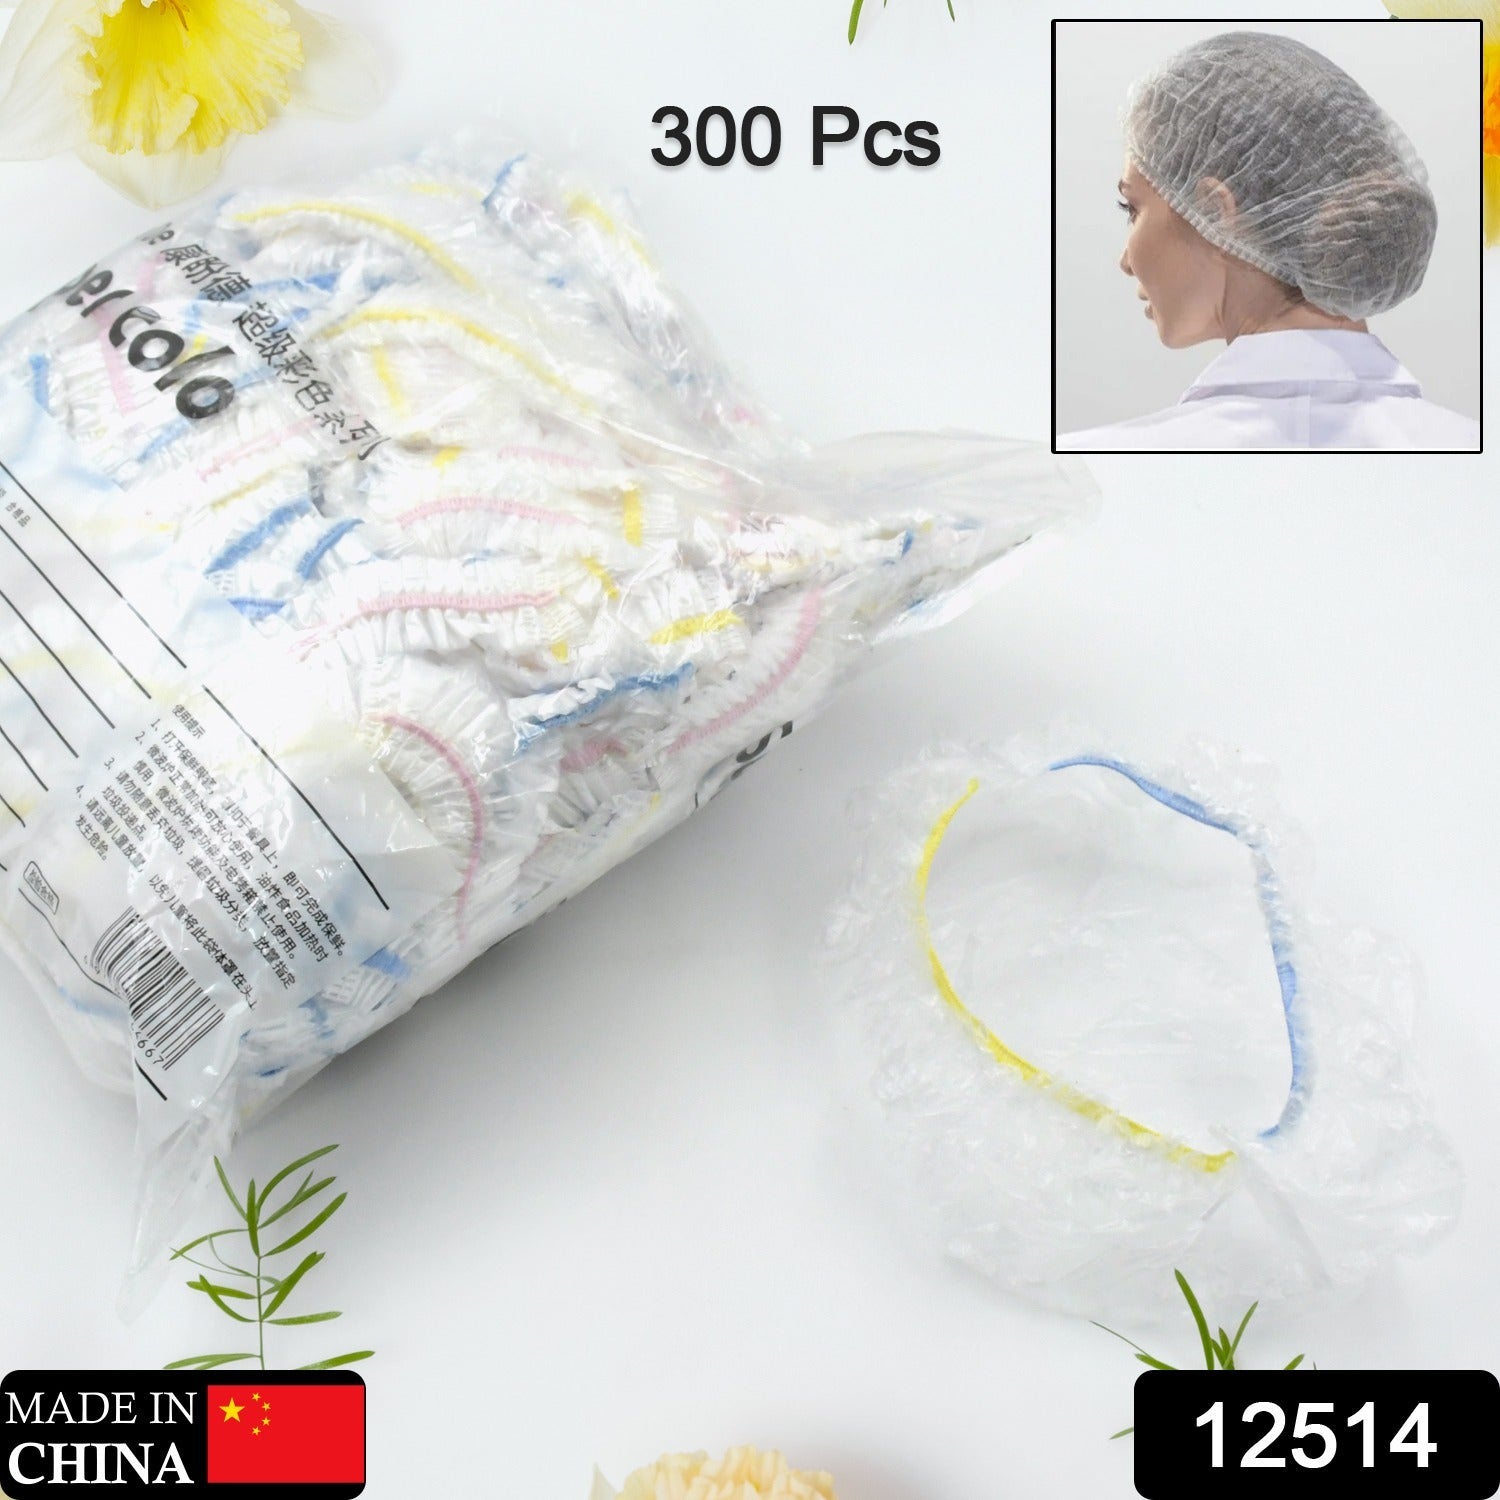 12514 Disposable Shower Caps for Women Thicker Waterproof and Individually Wrapped, Plastic Elastic Hair Bath Caps for Hotel and Spa, Hair Salon, Home Use, Portable Travel (pack of 300 Pc)